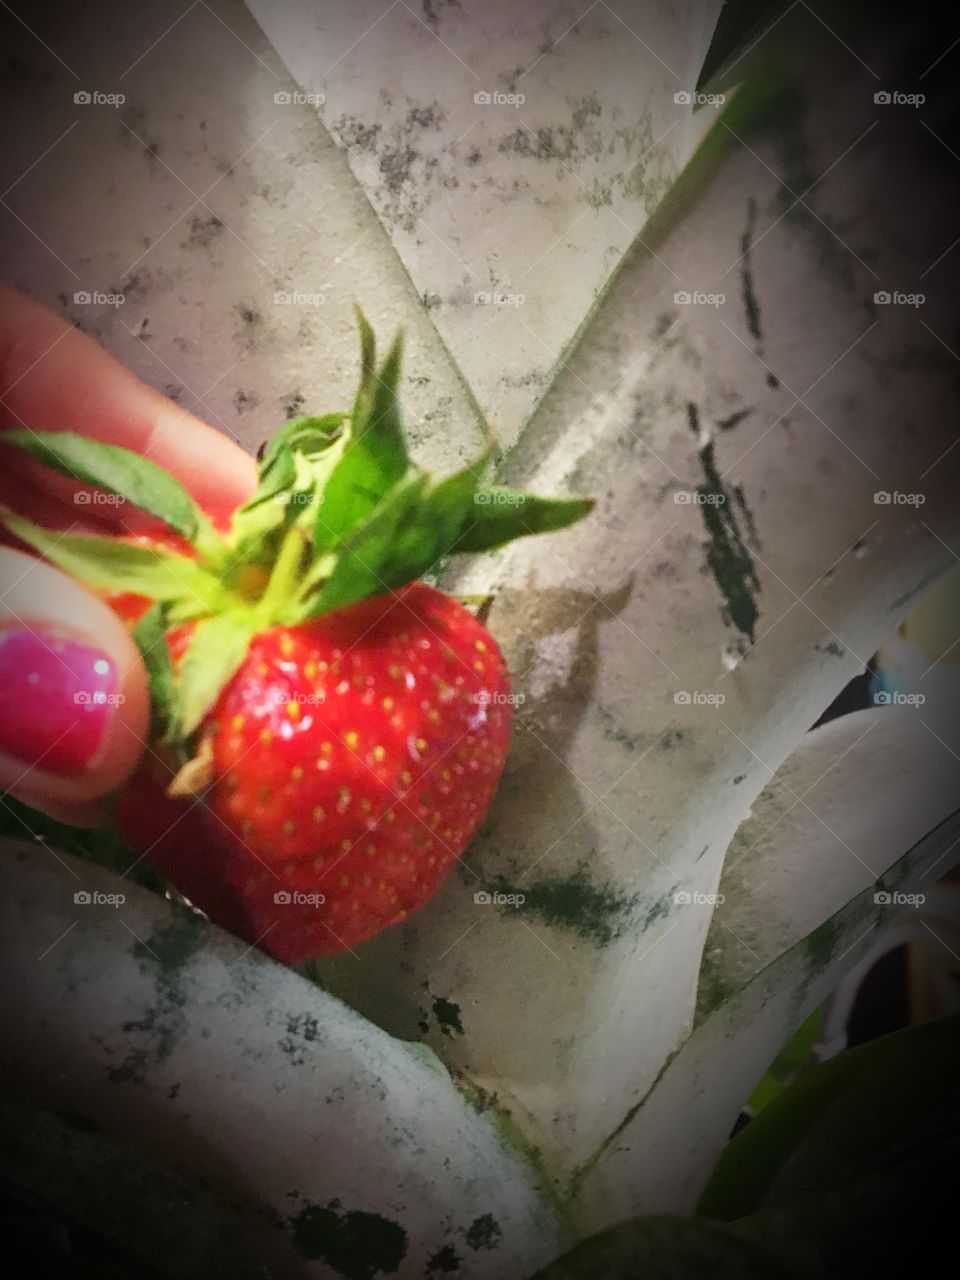 Eat a delicious strawberry 